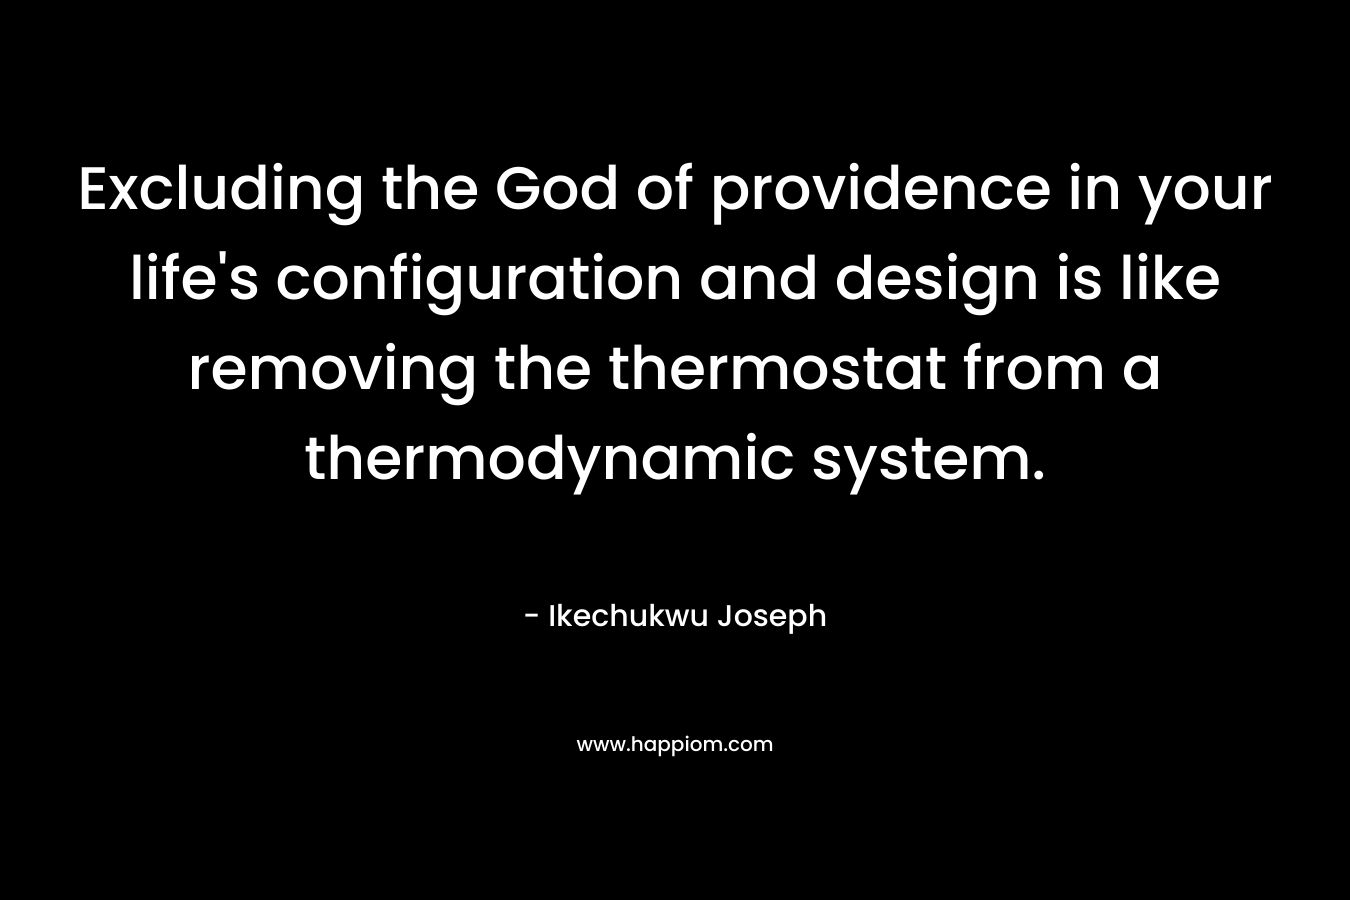 Excluding the God of providence in your life’s configuration and design is like removing the thermostat from a thermodynamic system. – Ikechukwu Joseph